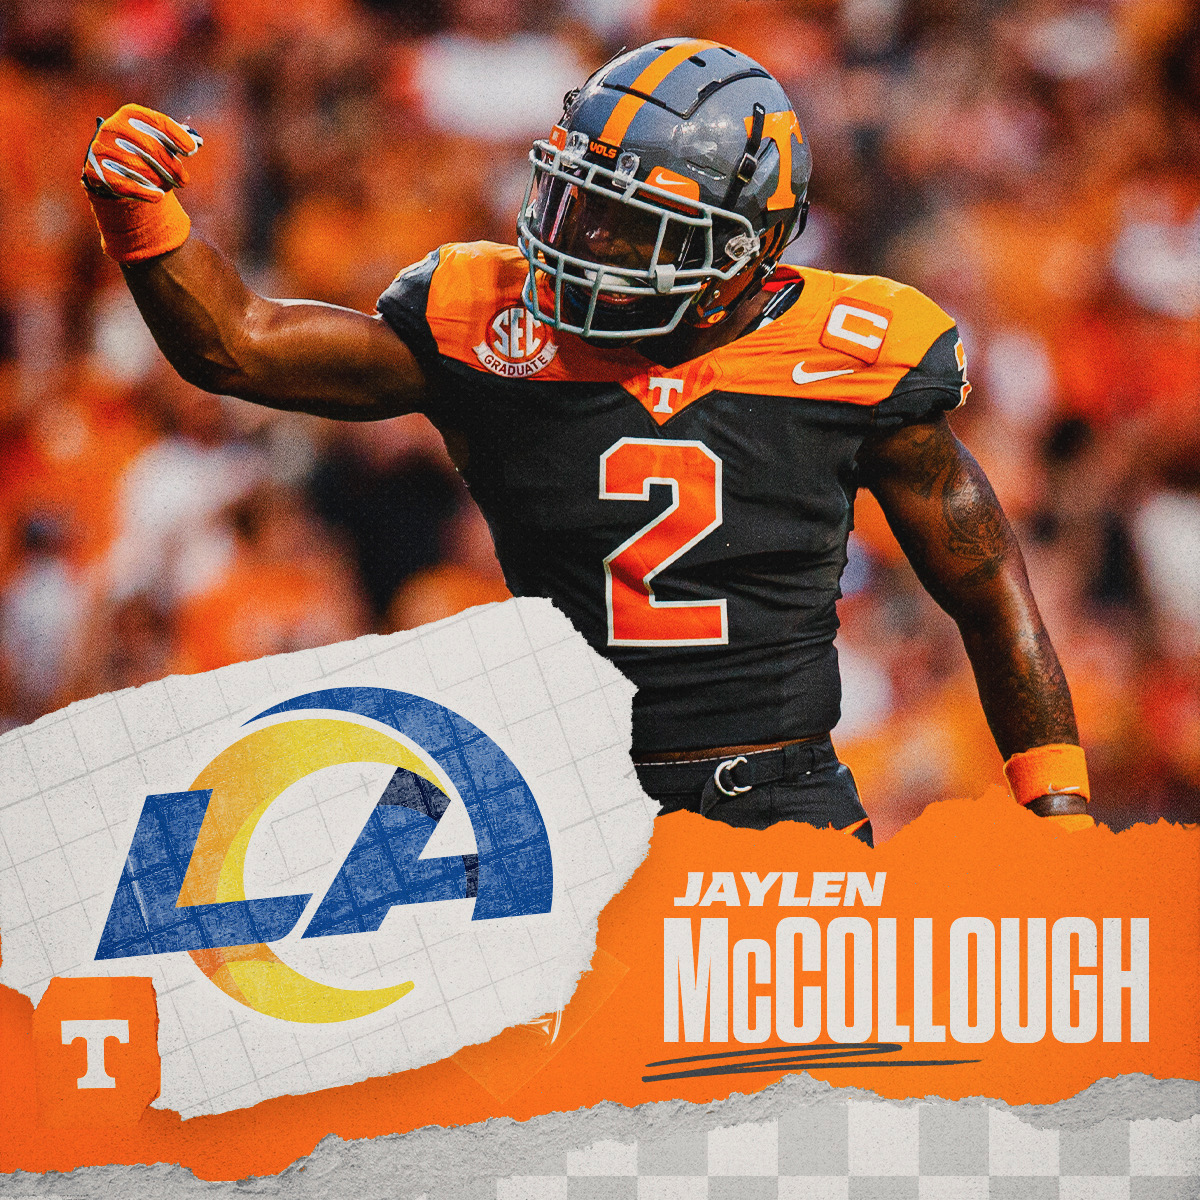 Opportunity awaits in L.A. ☀️ @Jay_Mccollough2 ➡️ @RamsNFL #RamsHouse